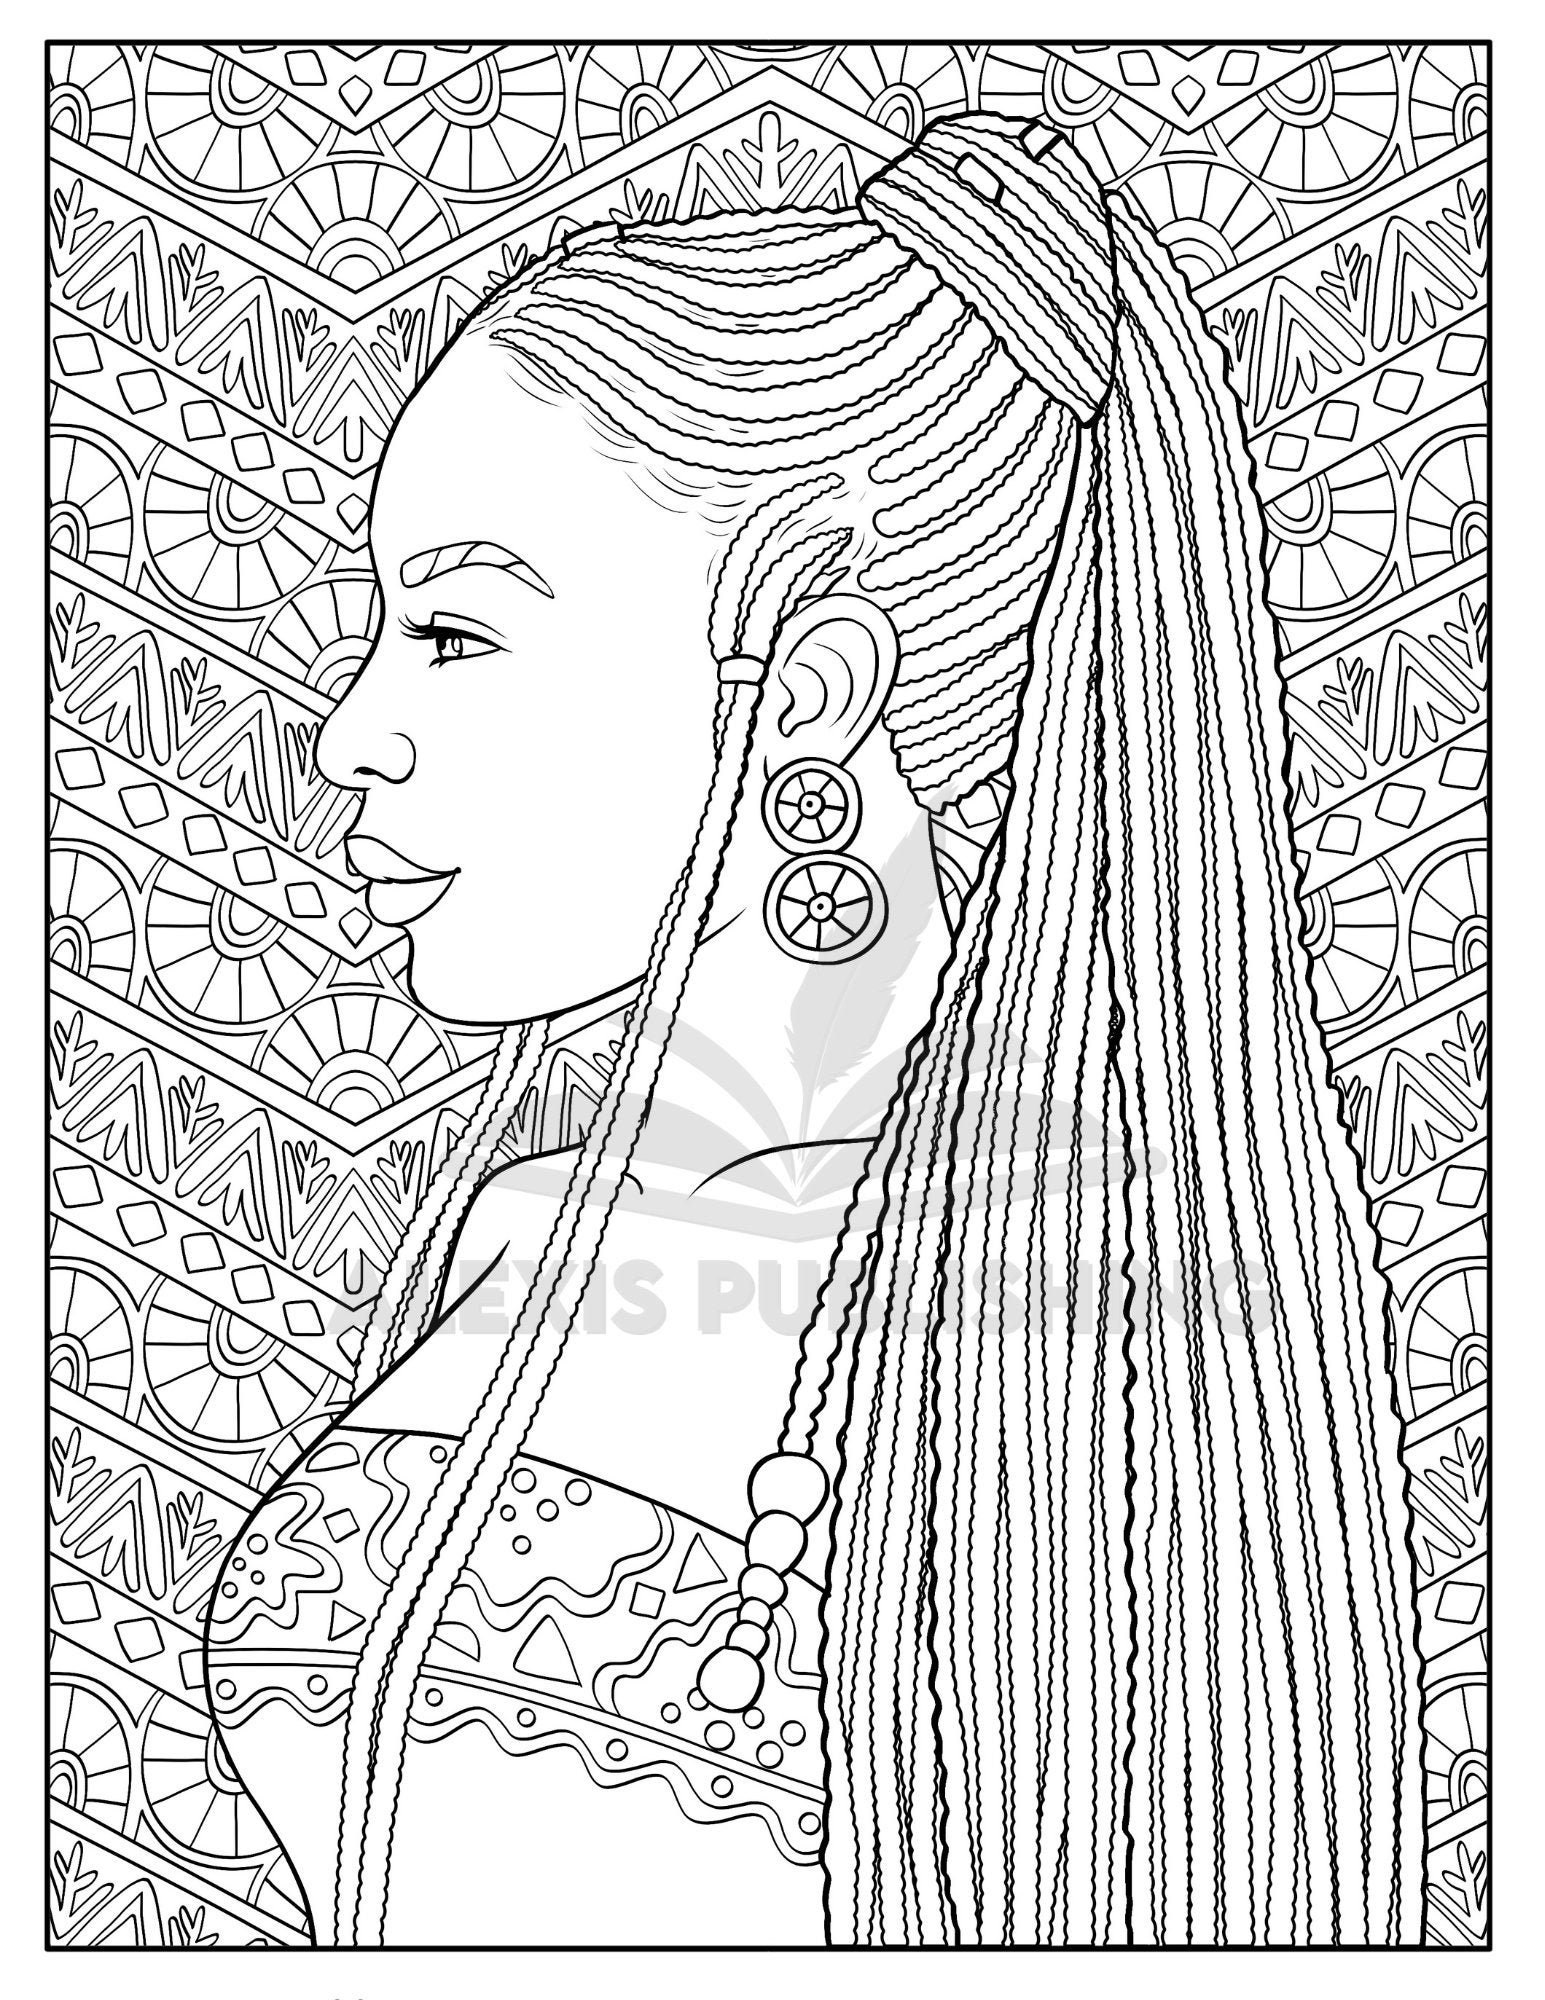 Black Girl Fashion Coloring Book for Adults: Fashion Design, Beautiful African American Women in Stylish Outfits to Color (Paperback)